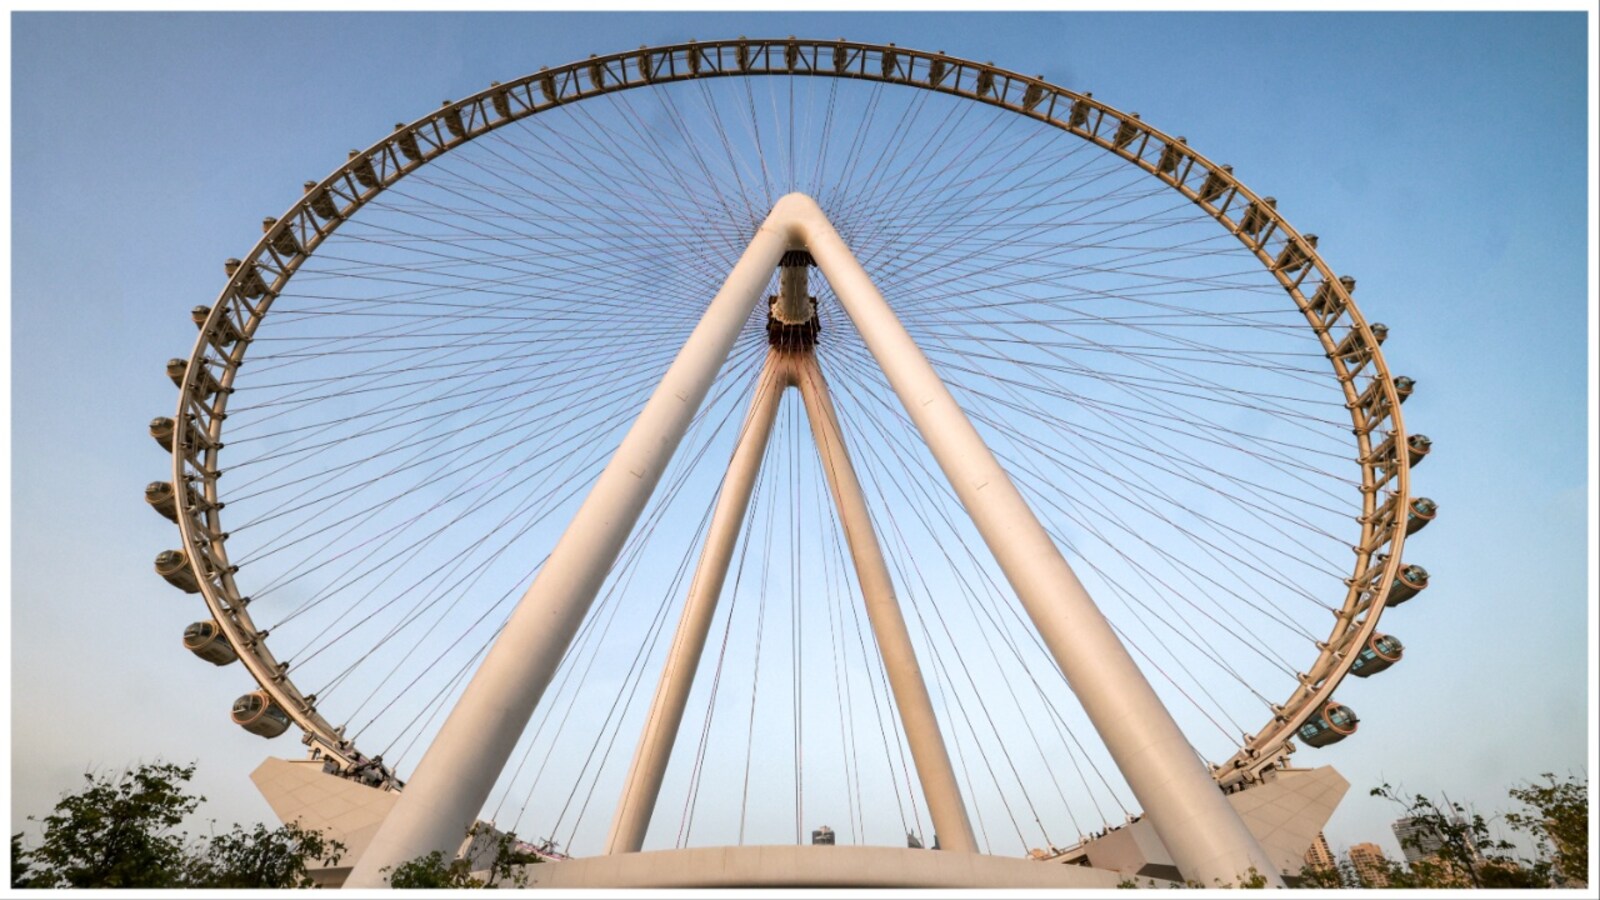 World's largest ferris wheel in Dubai has mysteriously stopped turning and  no one knows why